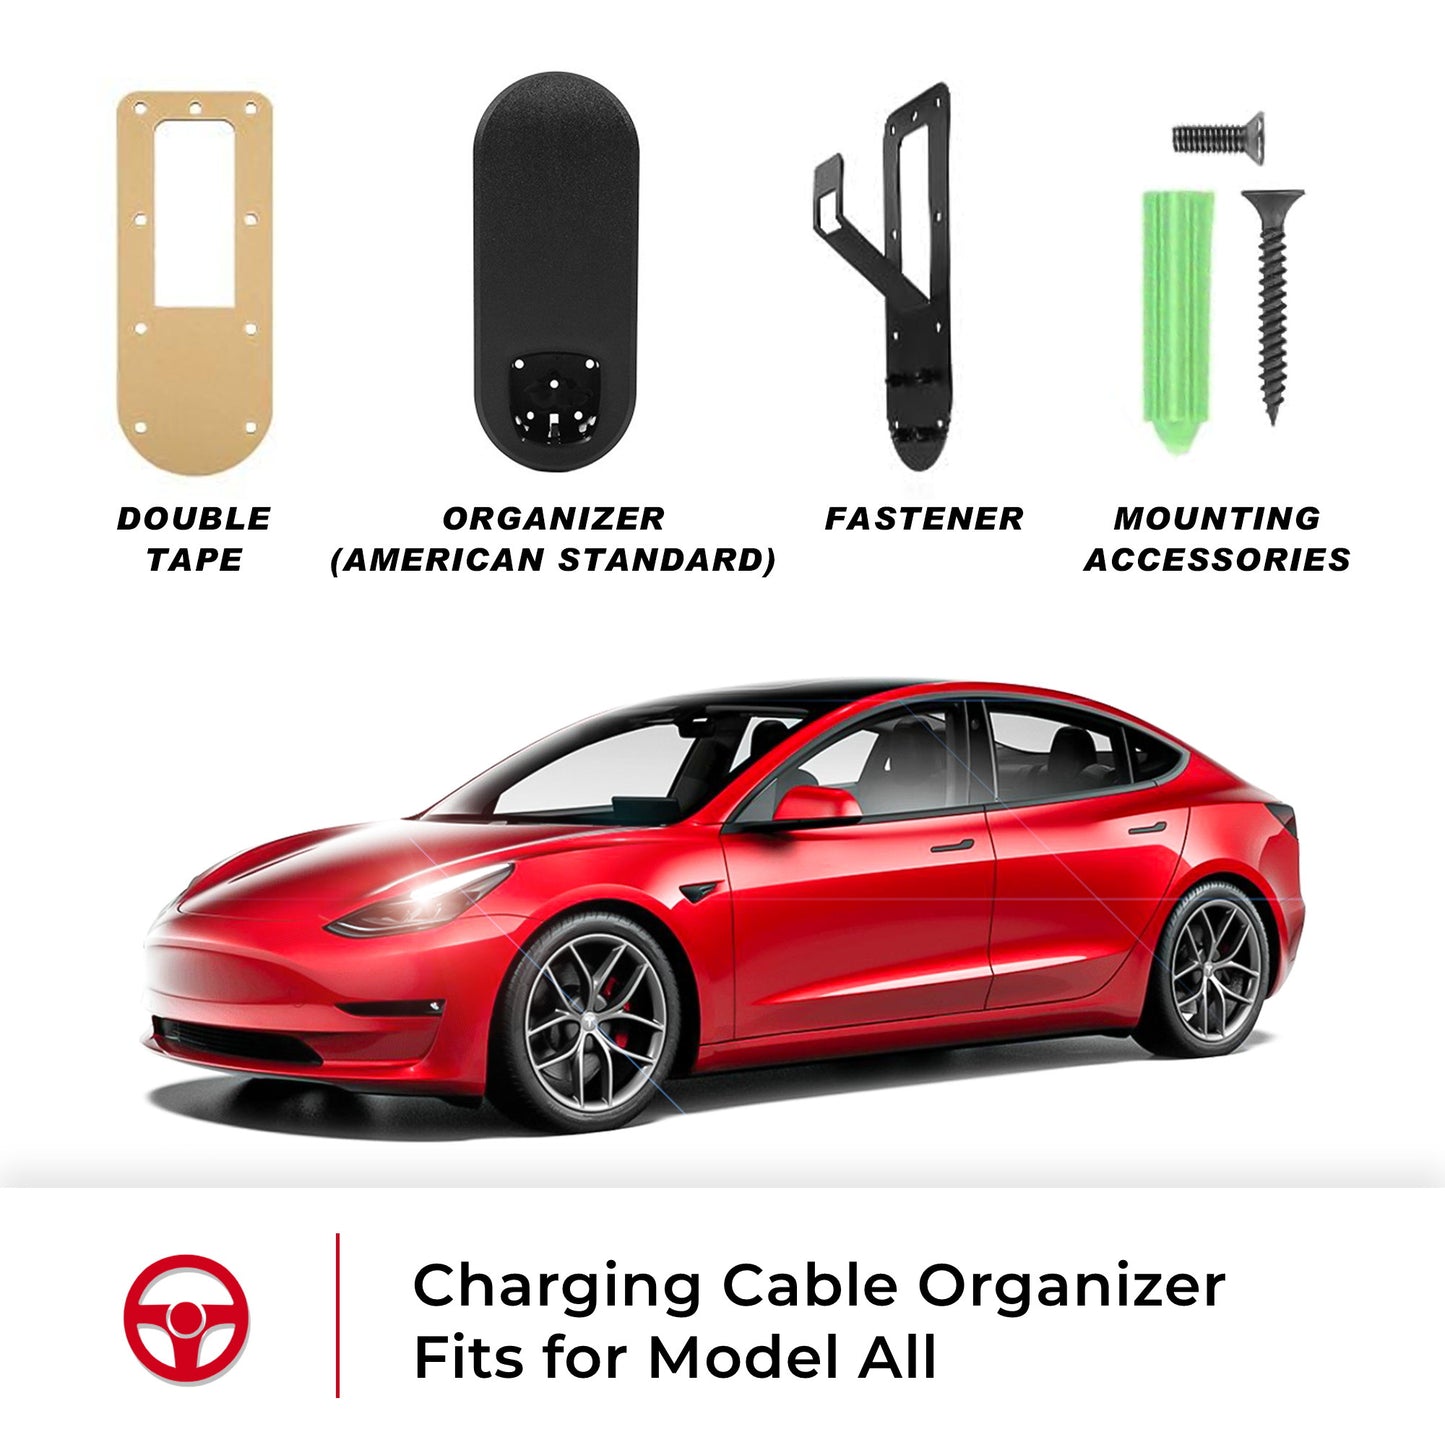 charging cable organizer tesla model 3 Y X S car 2022 2023 2021 2020 s3xy arcoche accessories accessory aftermarket price Vehicles standard long range performance sr+ electric car rwd ev interior exterior diy decoration price elon musk must have black white